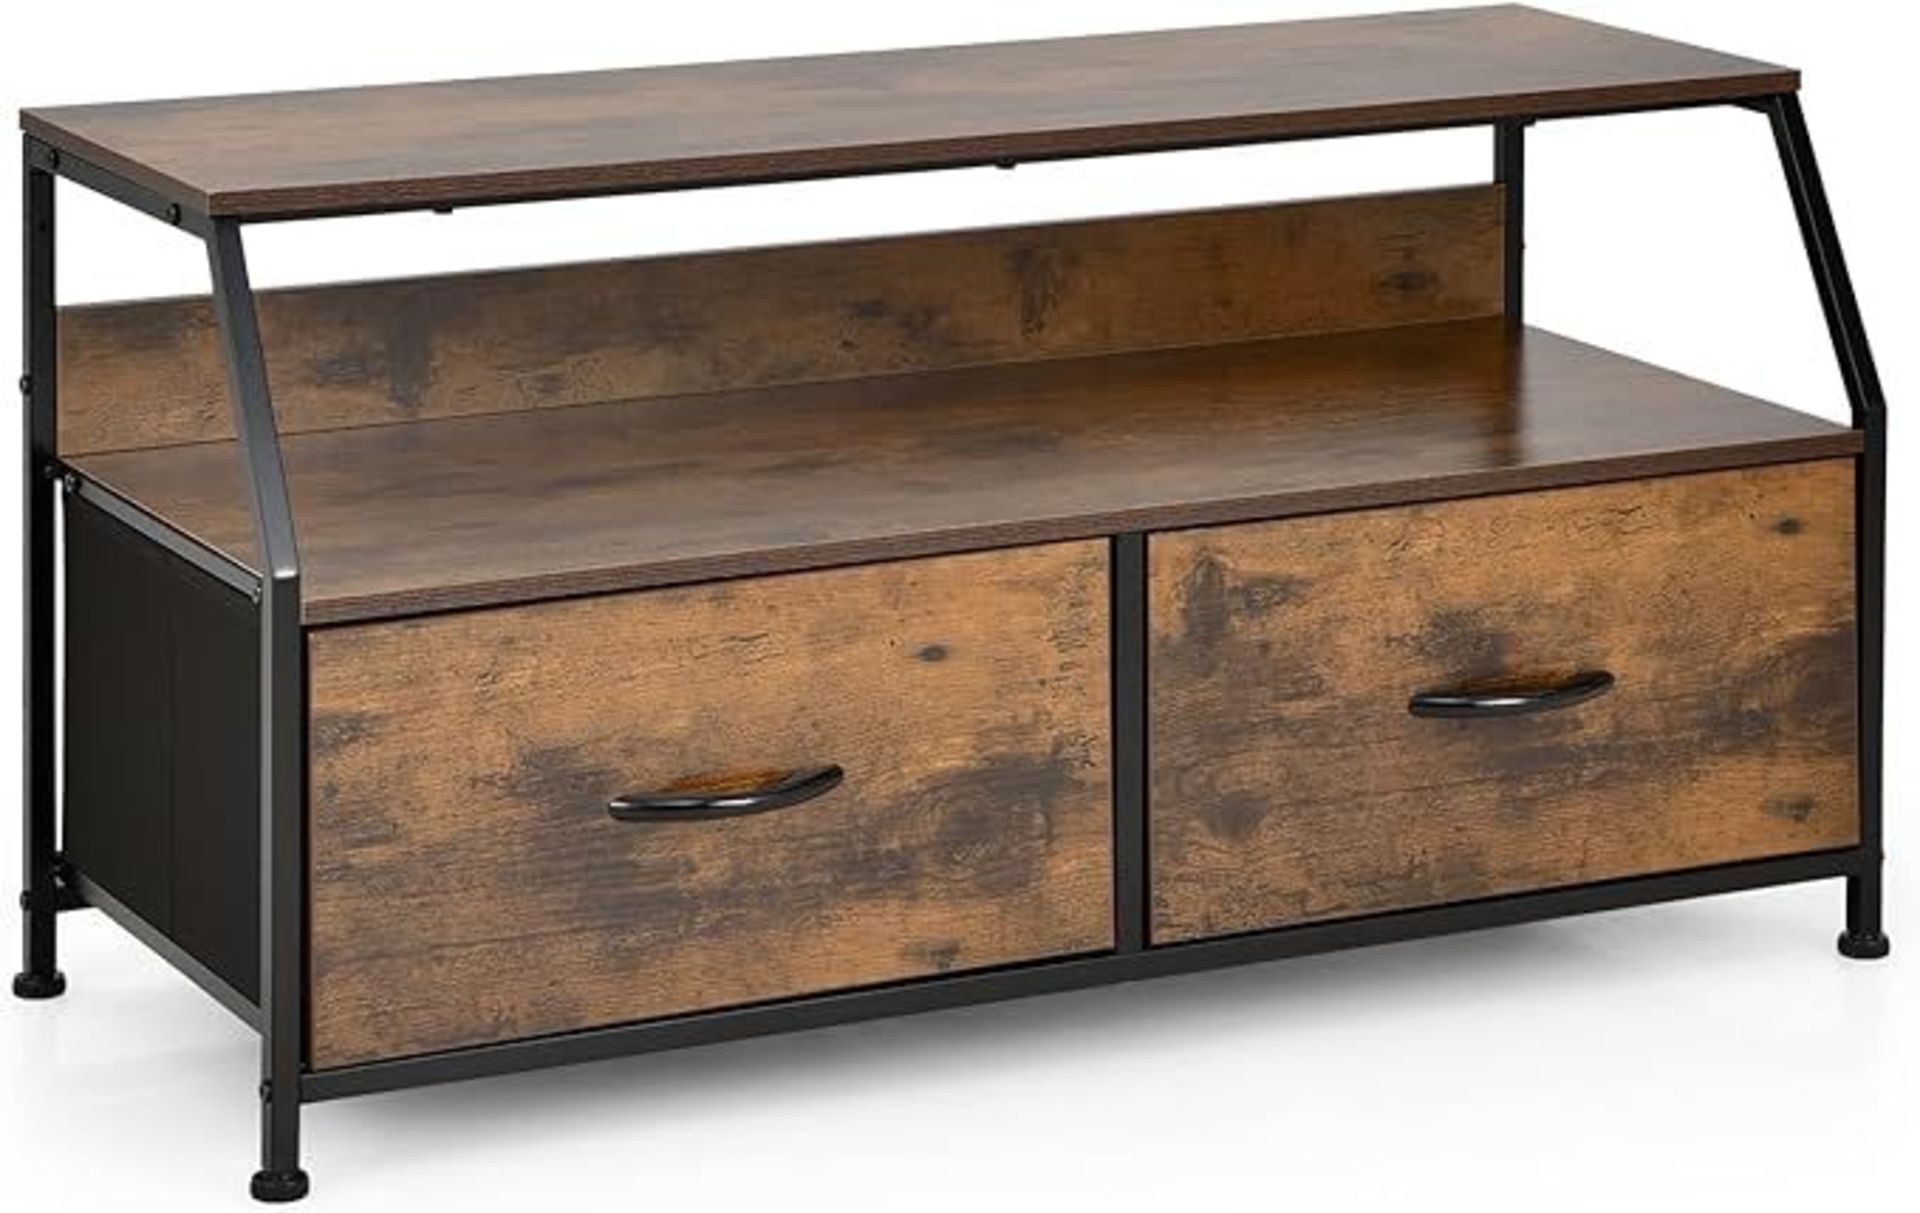 Luxury 2/3-Drawer Dresser, Fabric Chest of Drawers with Wooden Top and Front, Metal Frame Storage